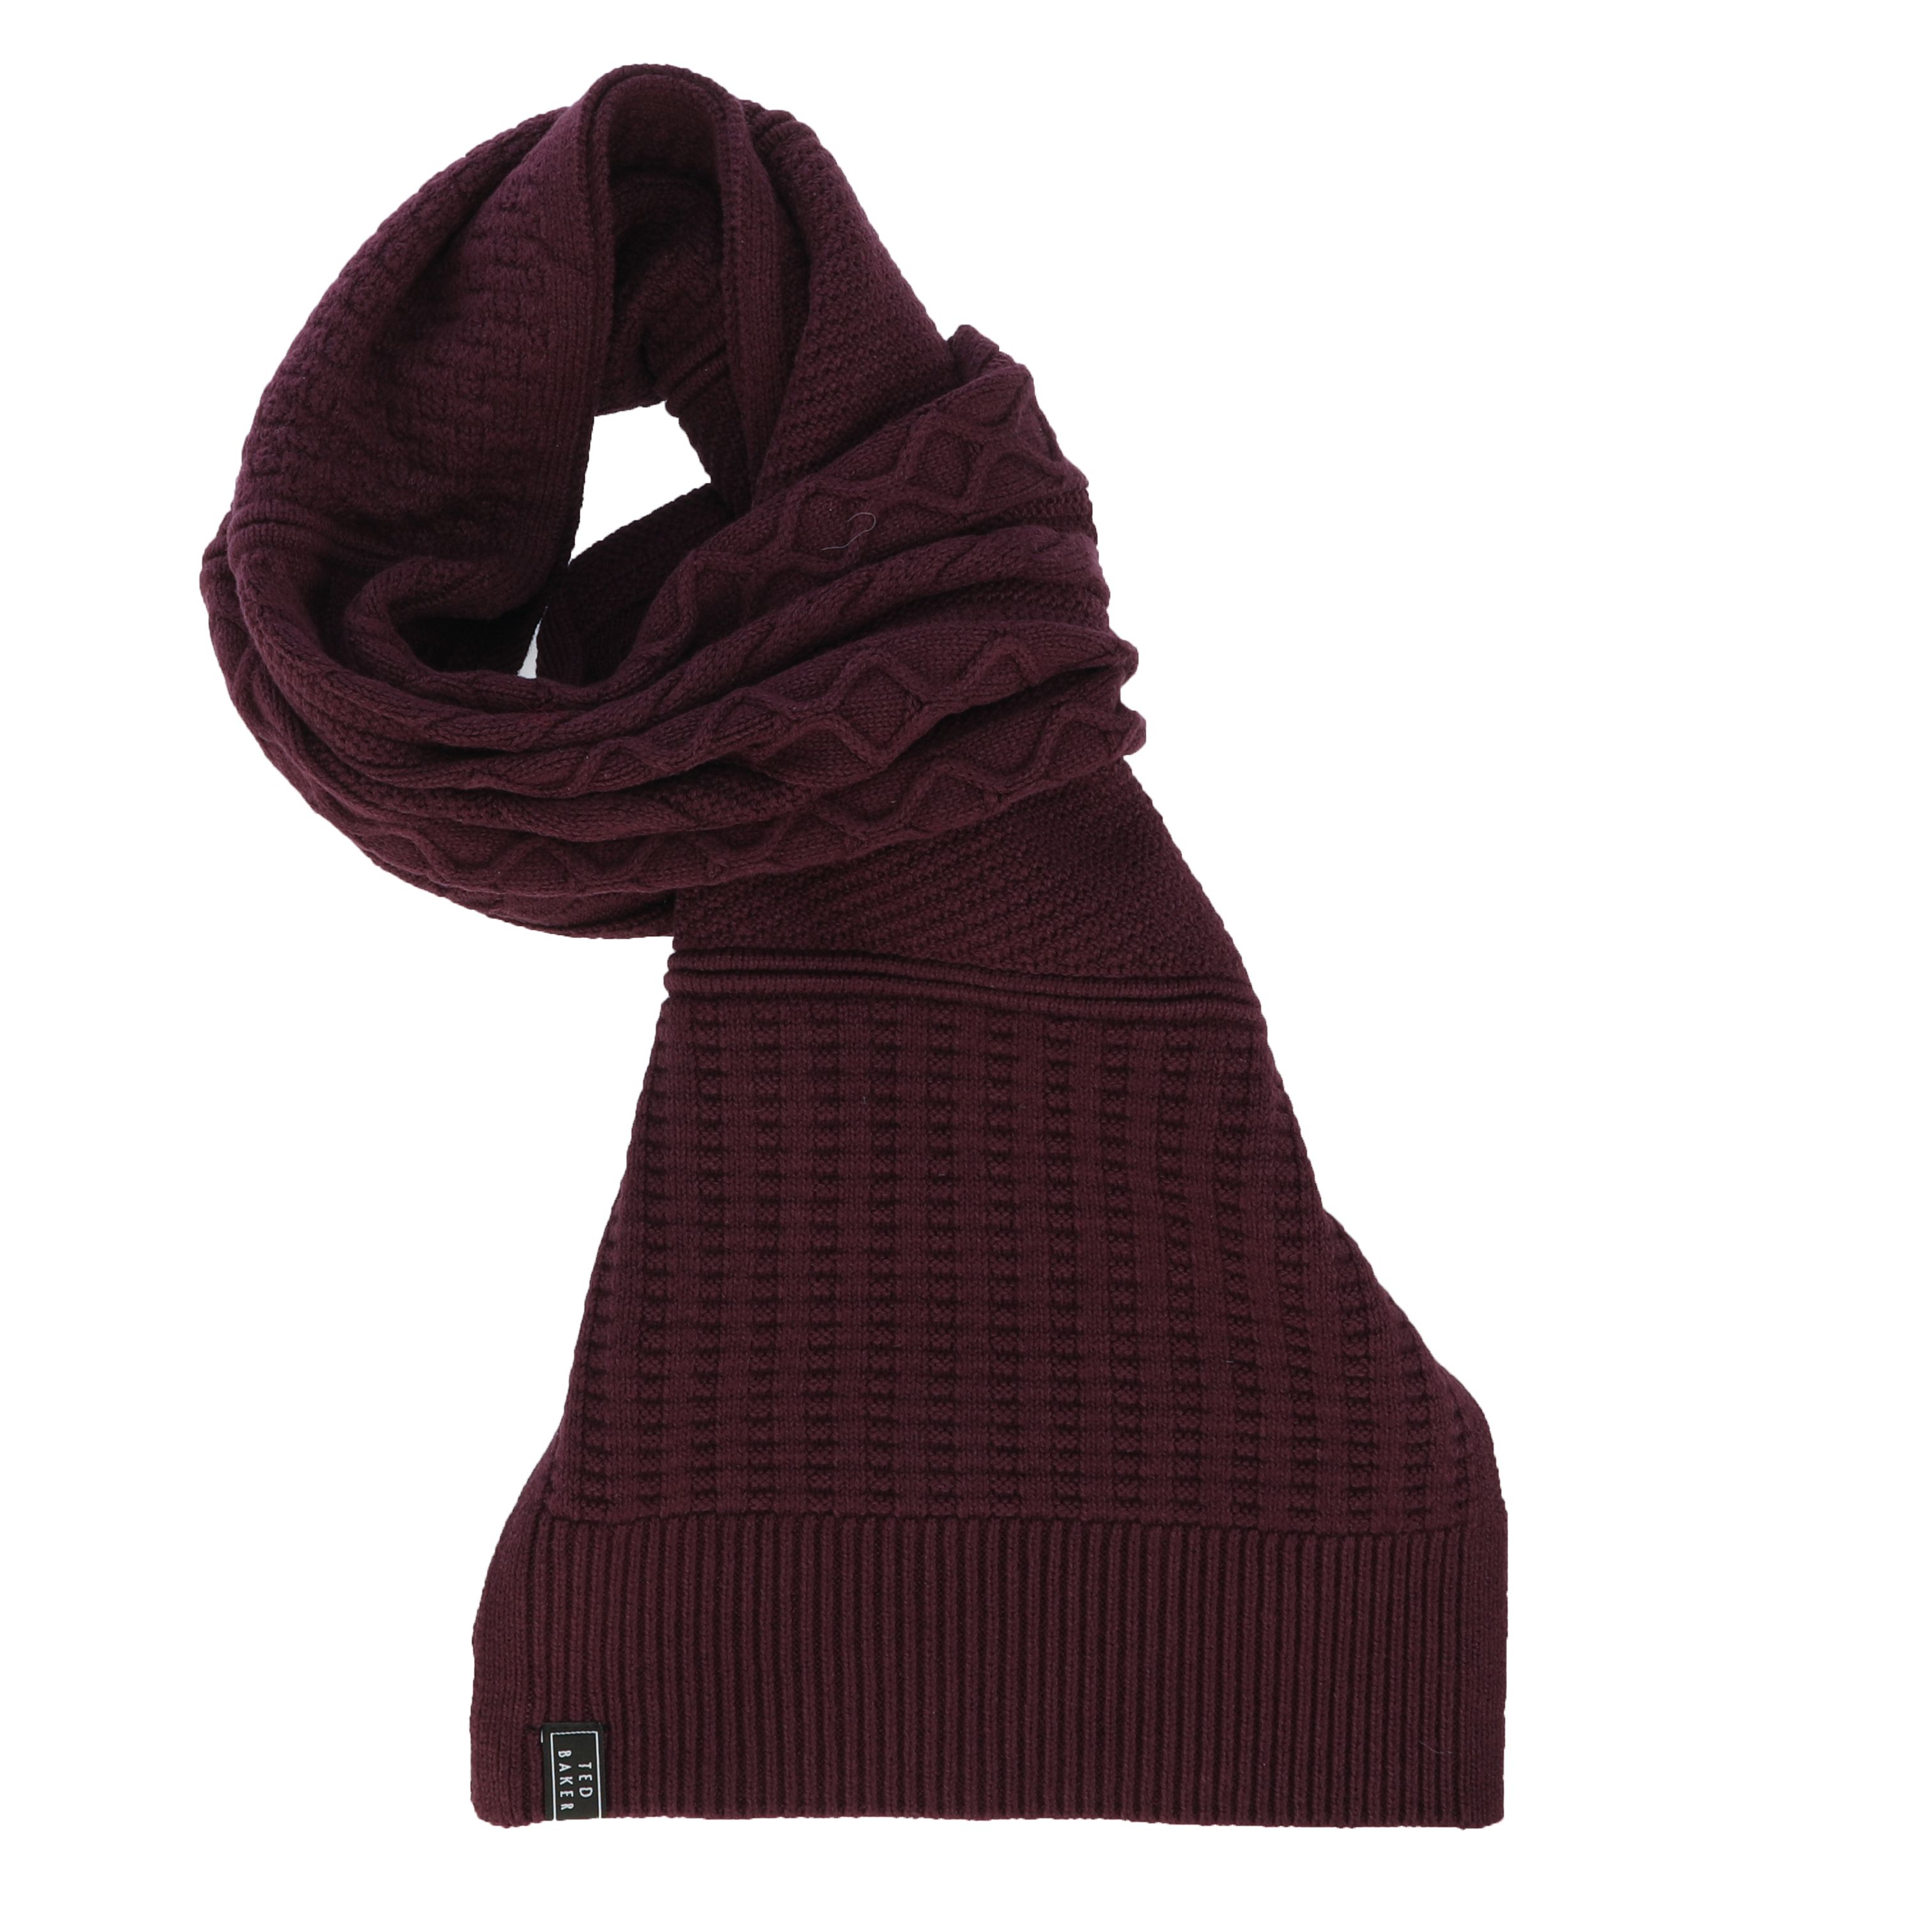 Mens Varsf Knitted Scarf